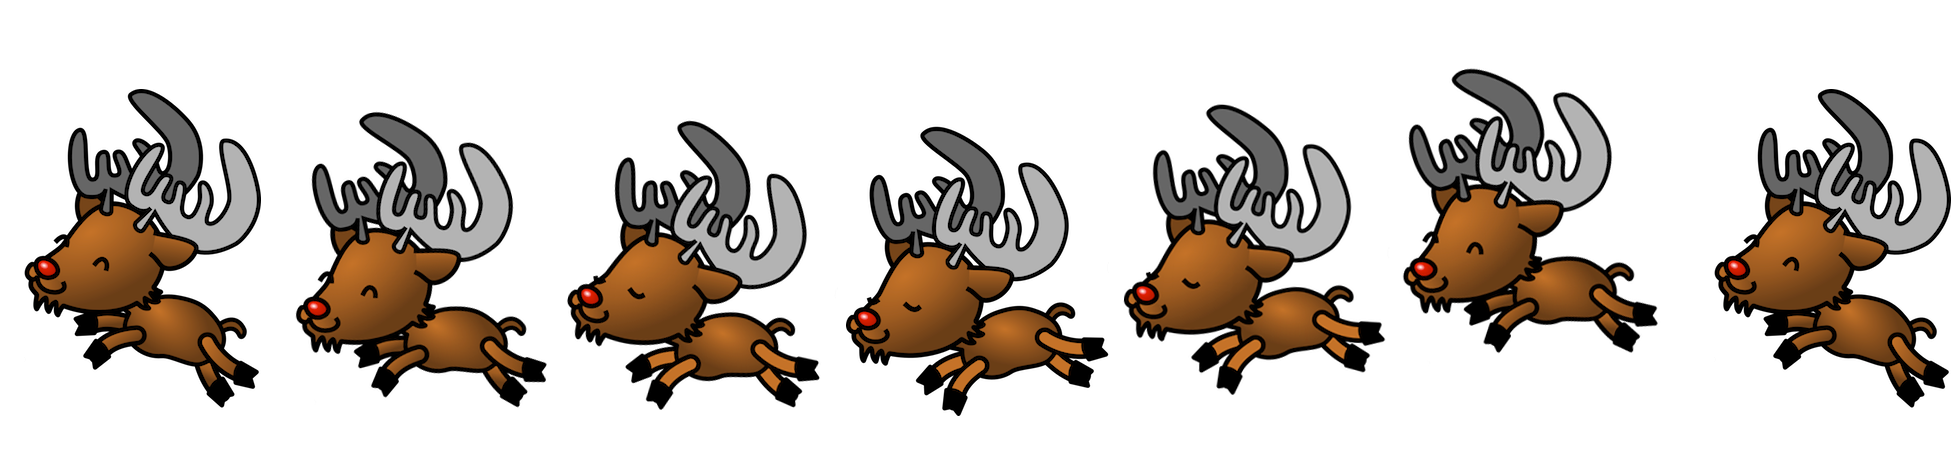 Simplifying animation with colliejs. Clipart reindeer dancing